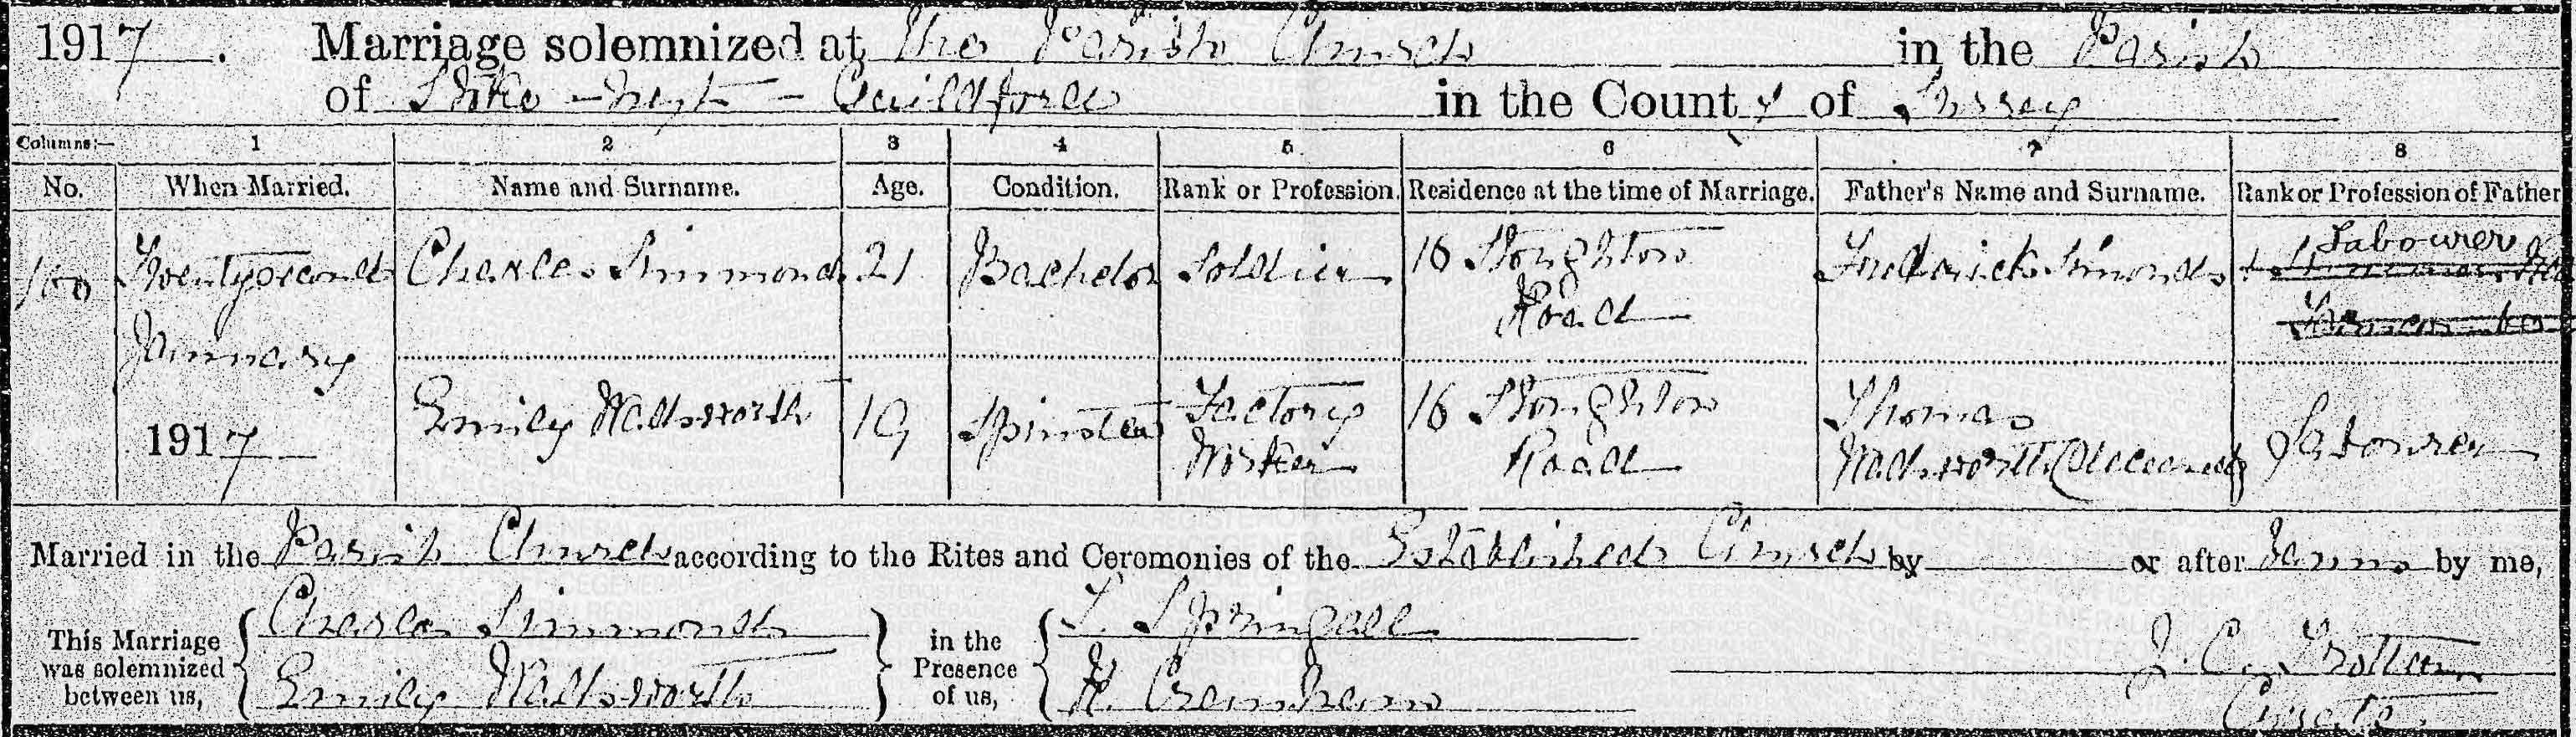 Charles and Emily Marriage Certificate